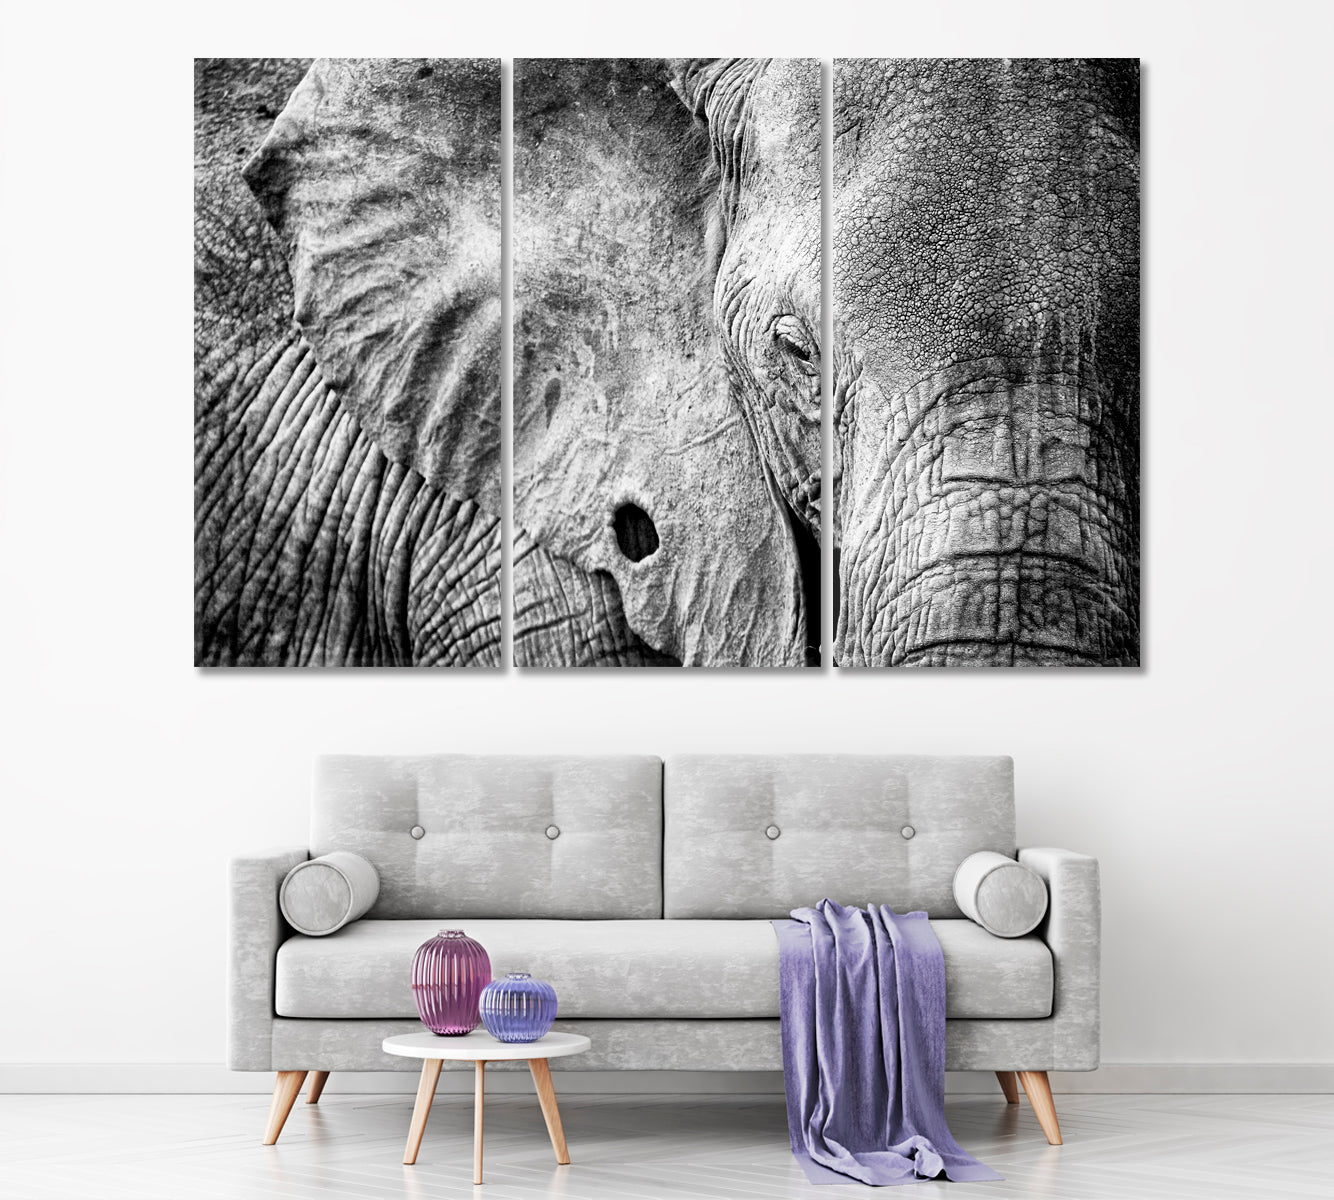 African Elephant in Black and White Canvas Print ArtLexy 3 Panels 36"x24" inches 